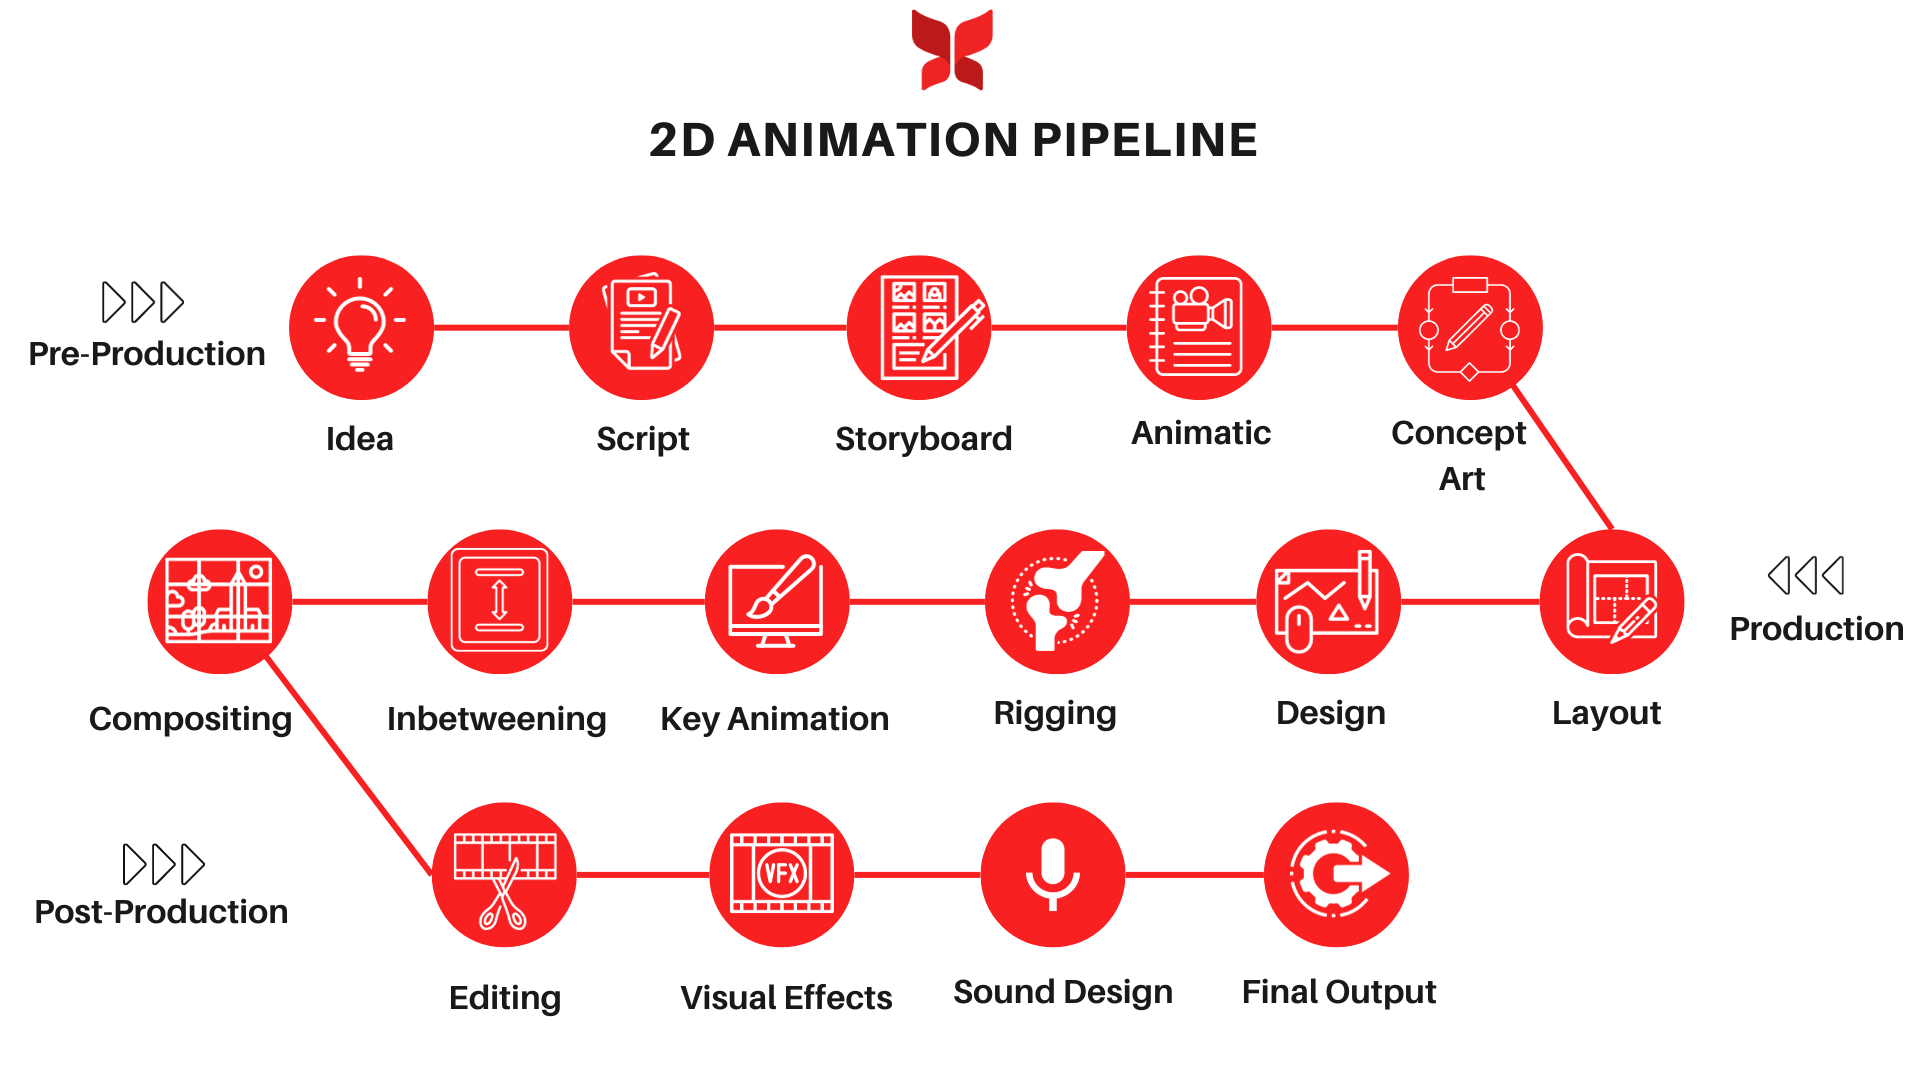 2D Animation Pipeline